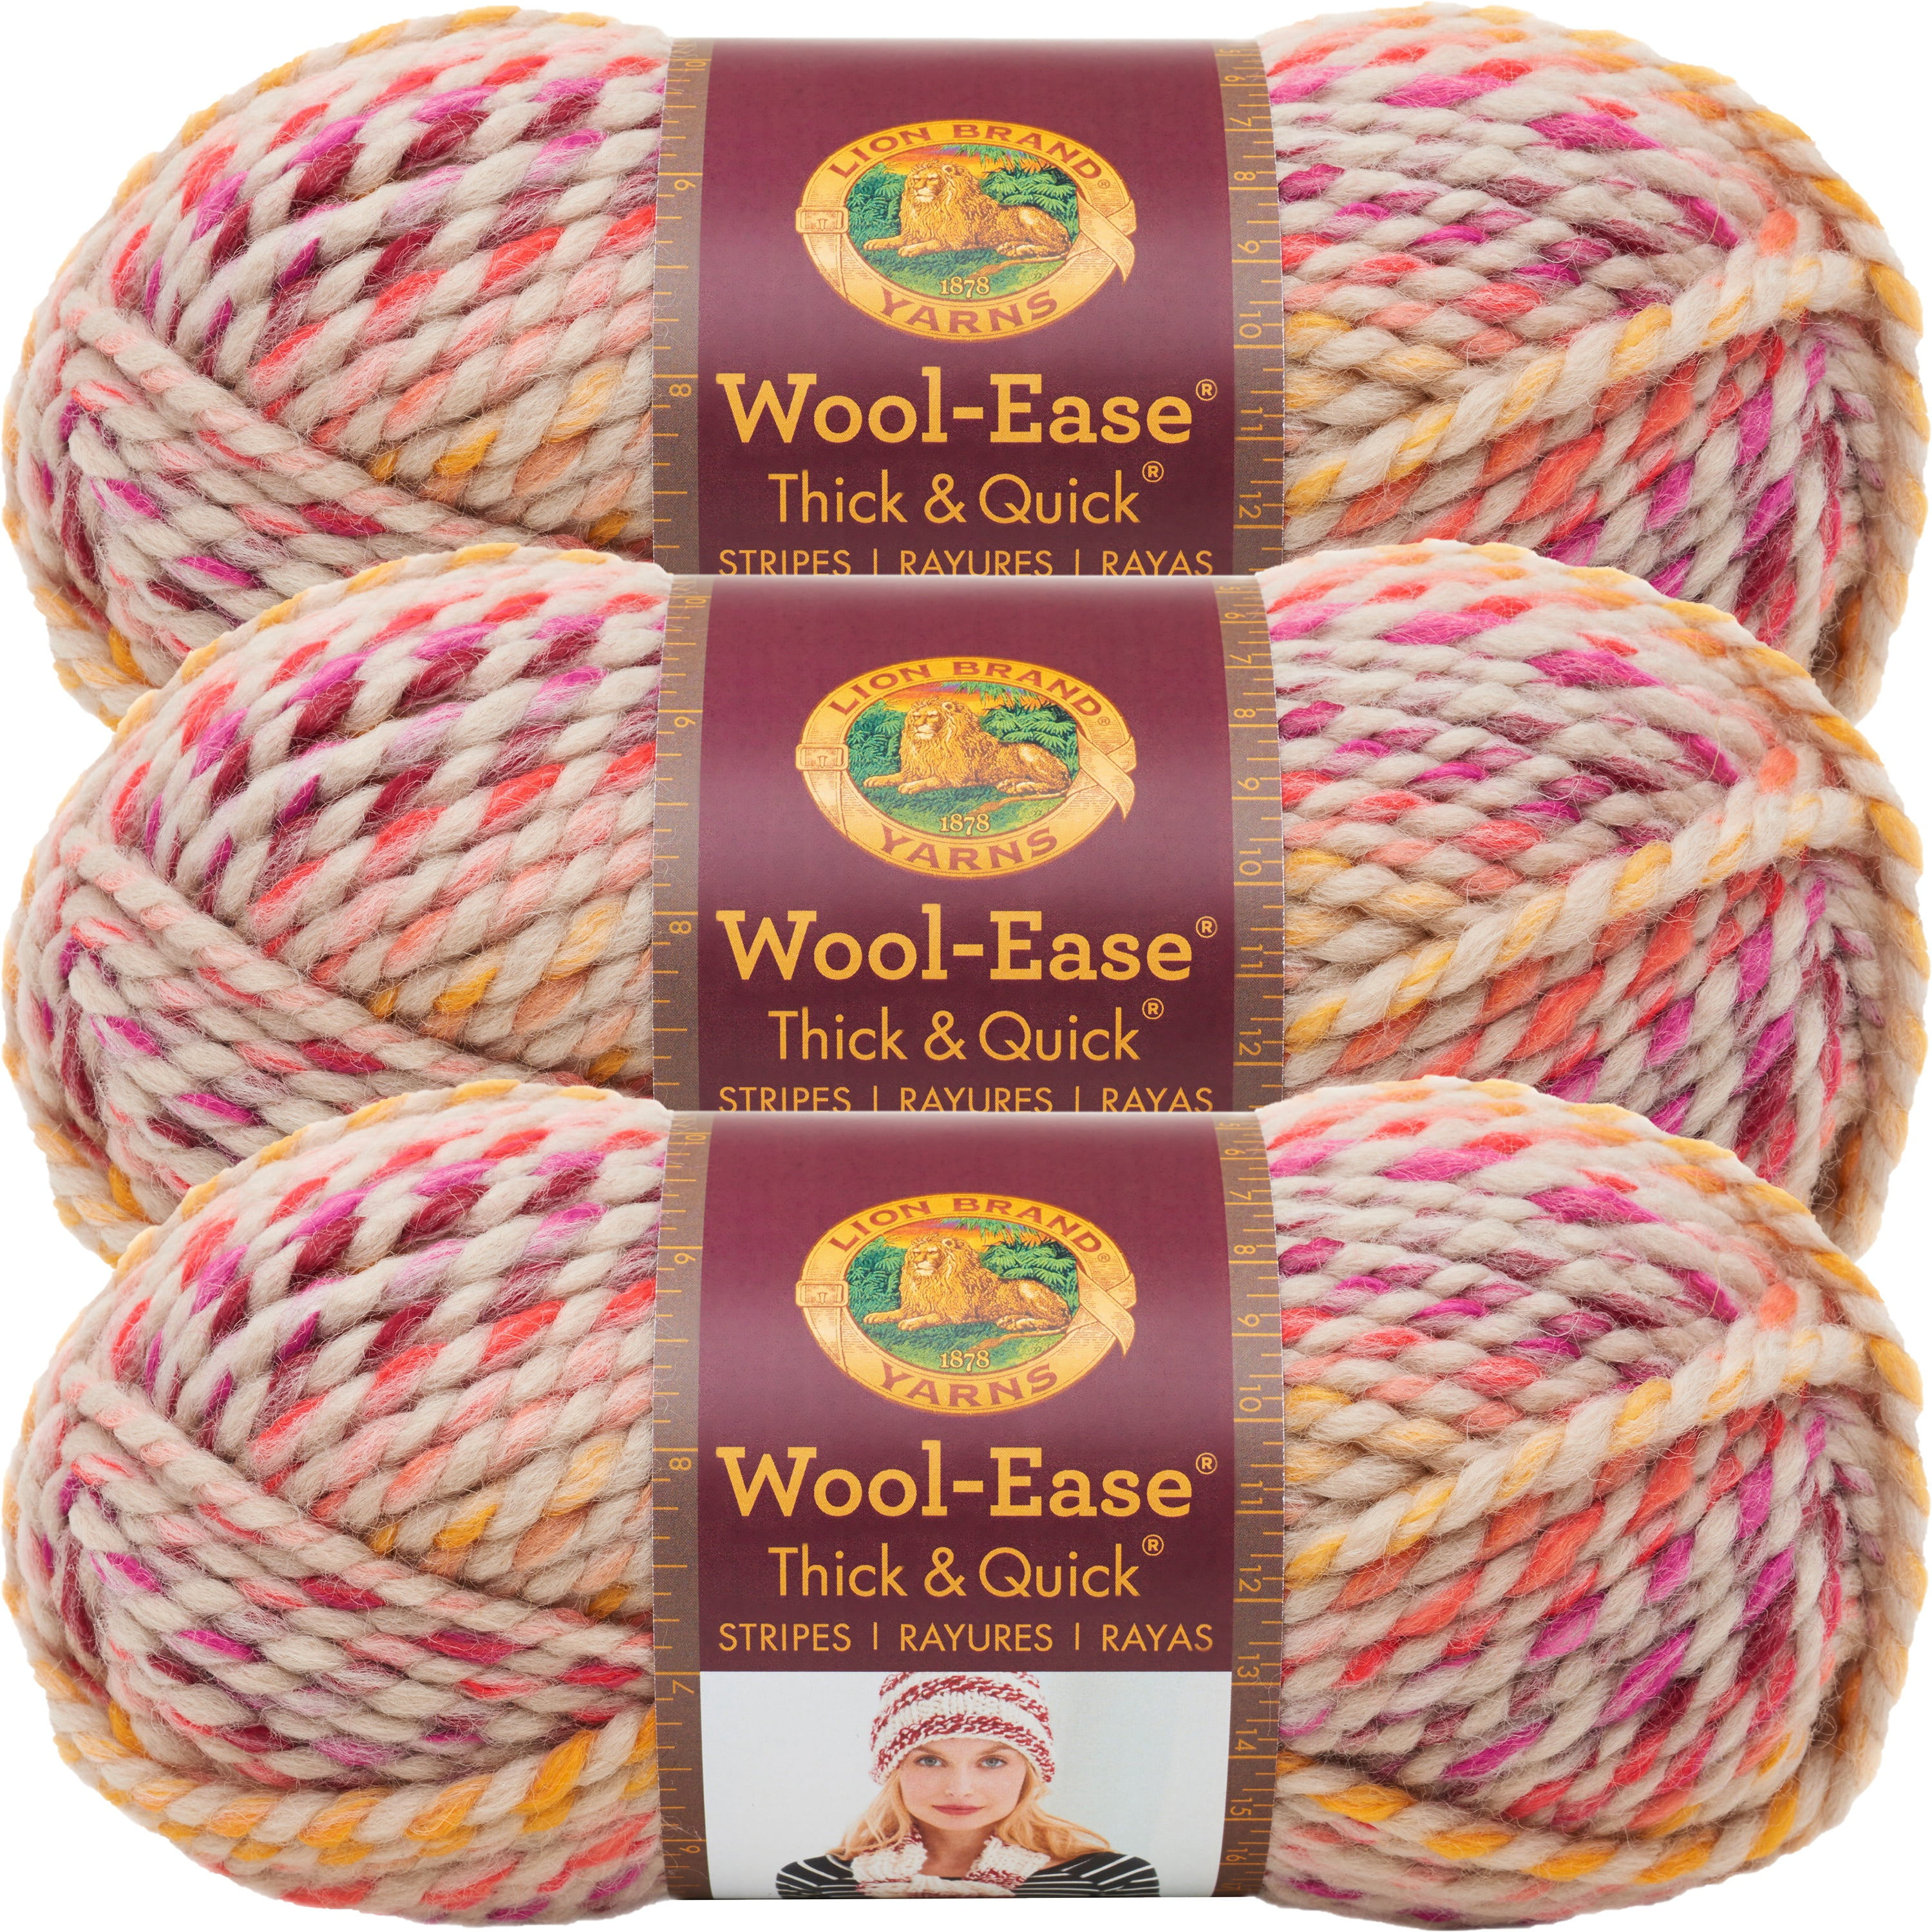 LION Brand Wool-Ease Thick & Quick Yarn - Spice Market